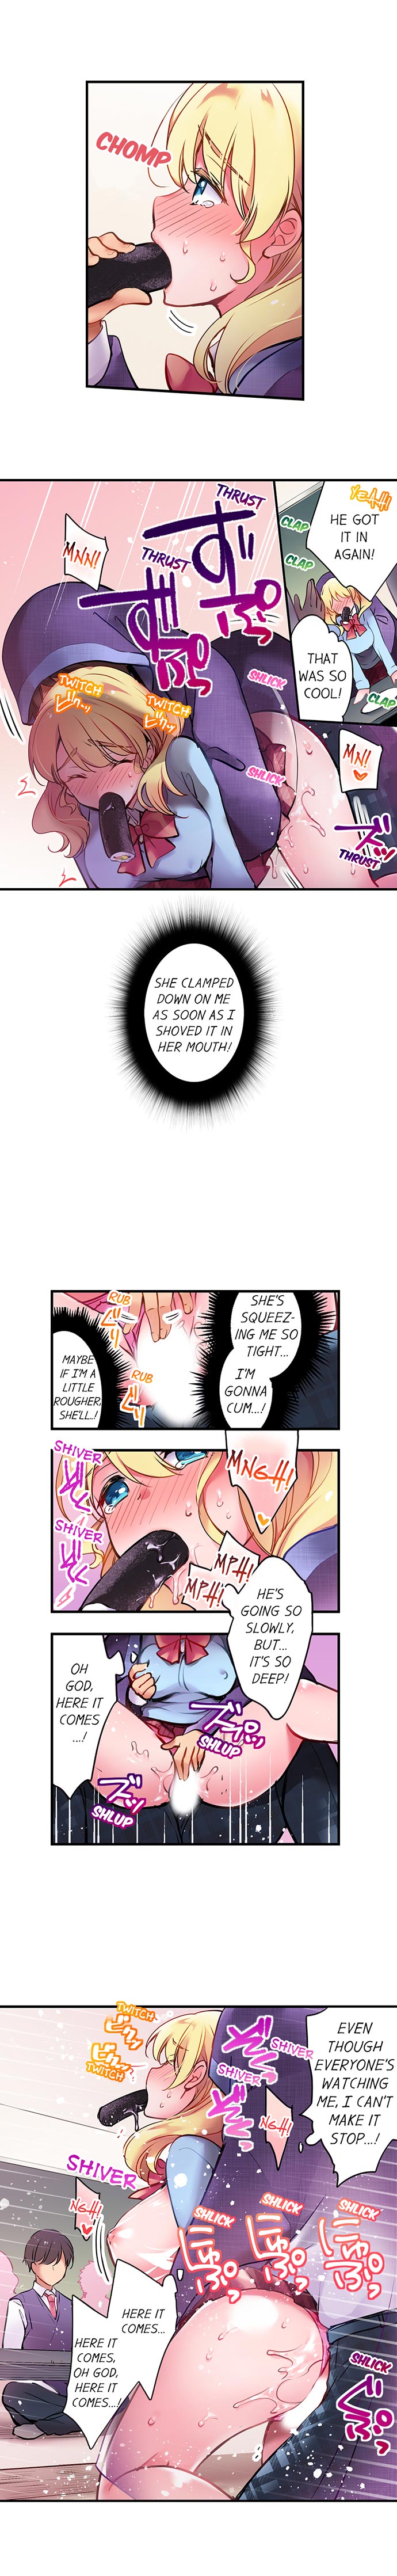 Cultural Appreciation Meets Sexual Education - Chapter 3 Page 7